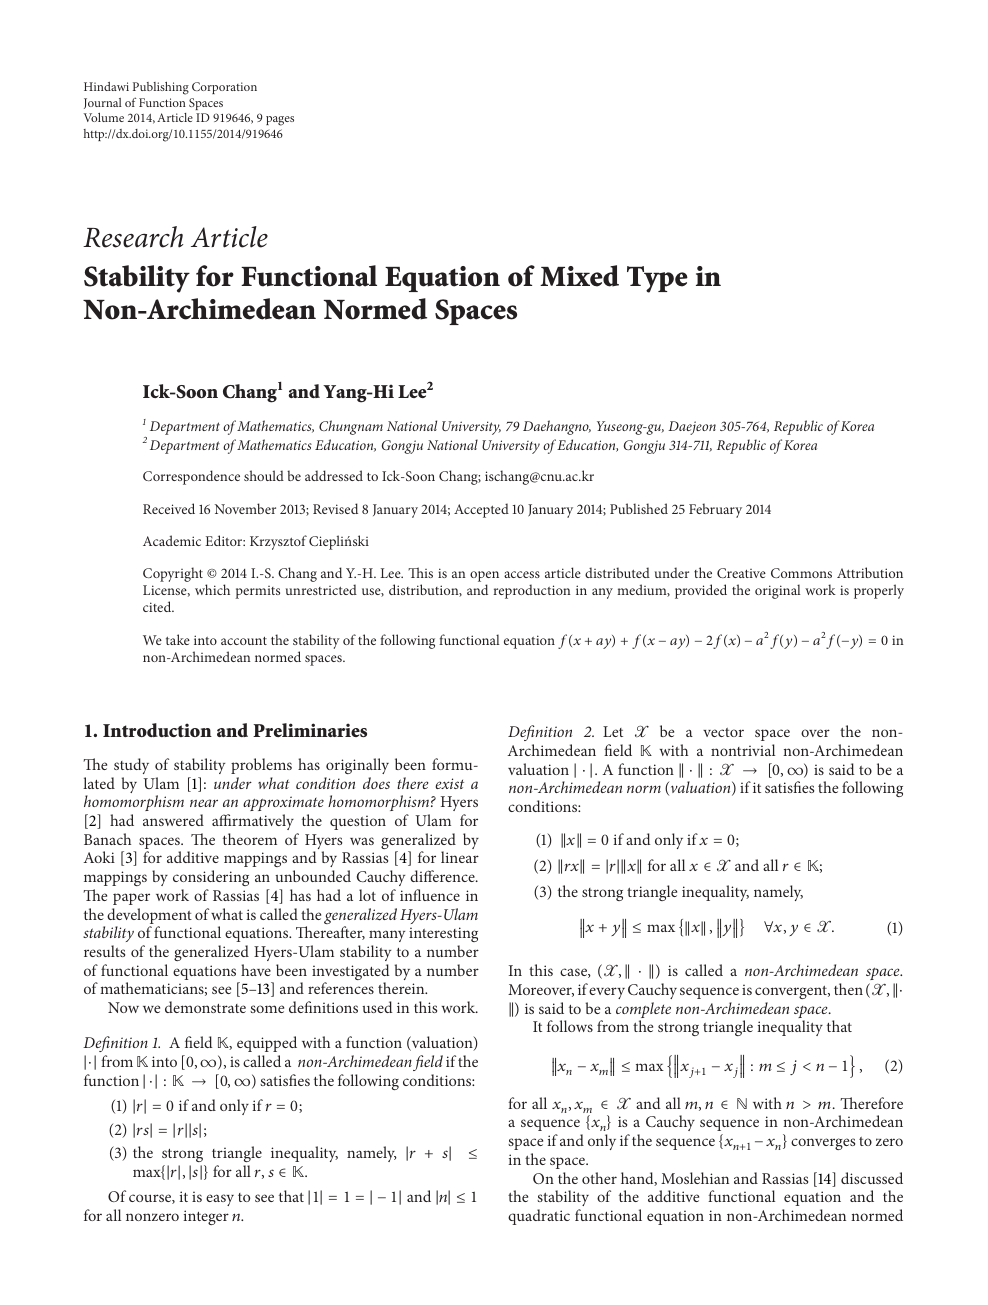 Stability For Functional Equation Of Mixed Type In Non Archimedean Normed Spaces Topic Of Research Paper In Mathematics Download Scholarly Article Pdf And Read For Free On Cyberleninka Open Science Hub